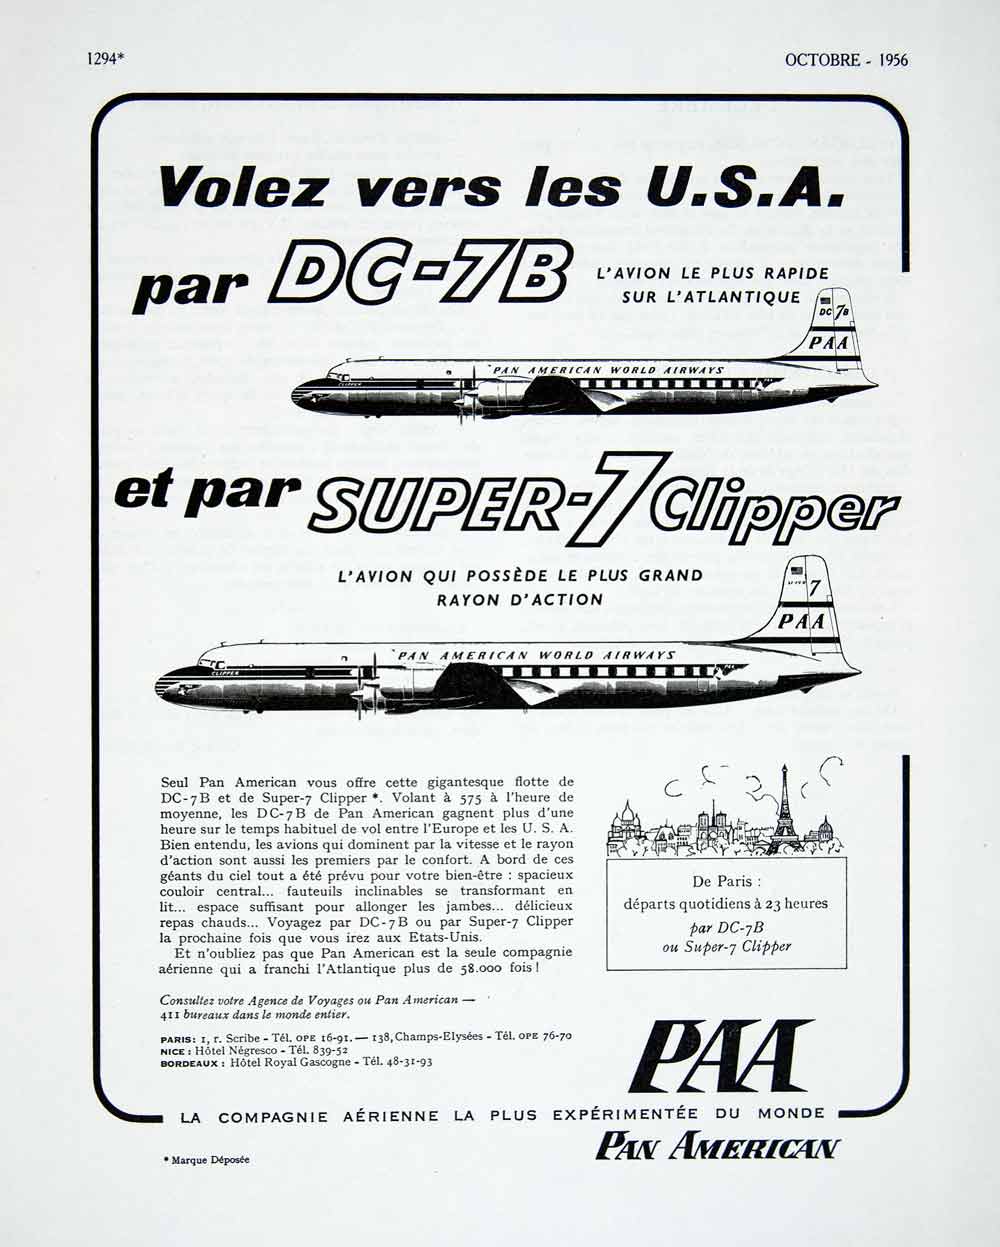 1956 Ad French DC-7B Super-7 Clipper Pan American Airline PAA Aeroplane VEN6